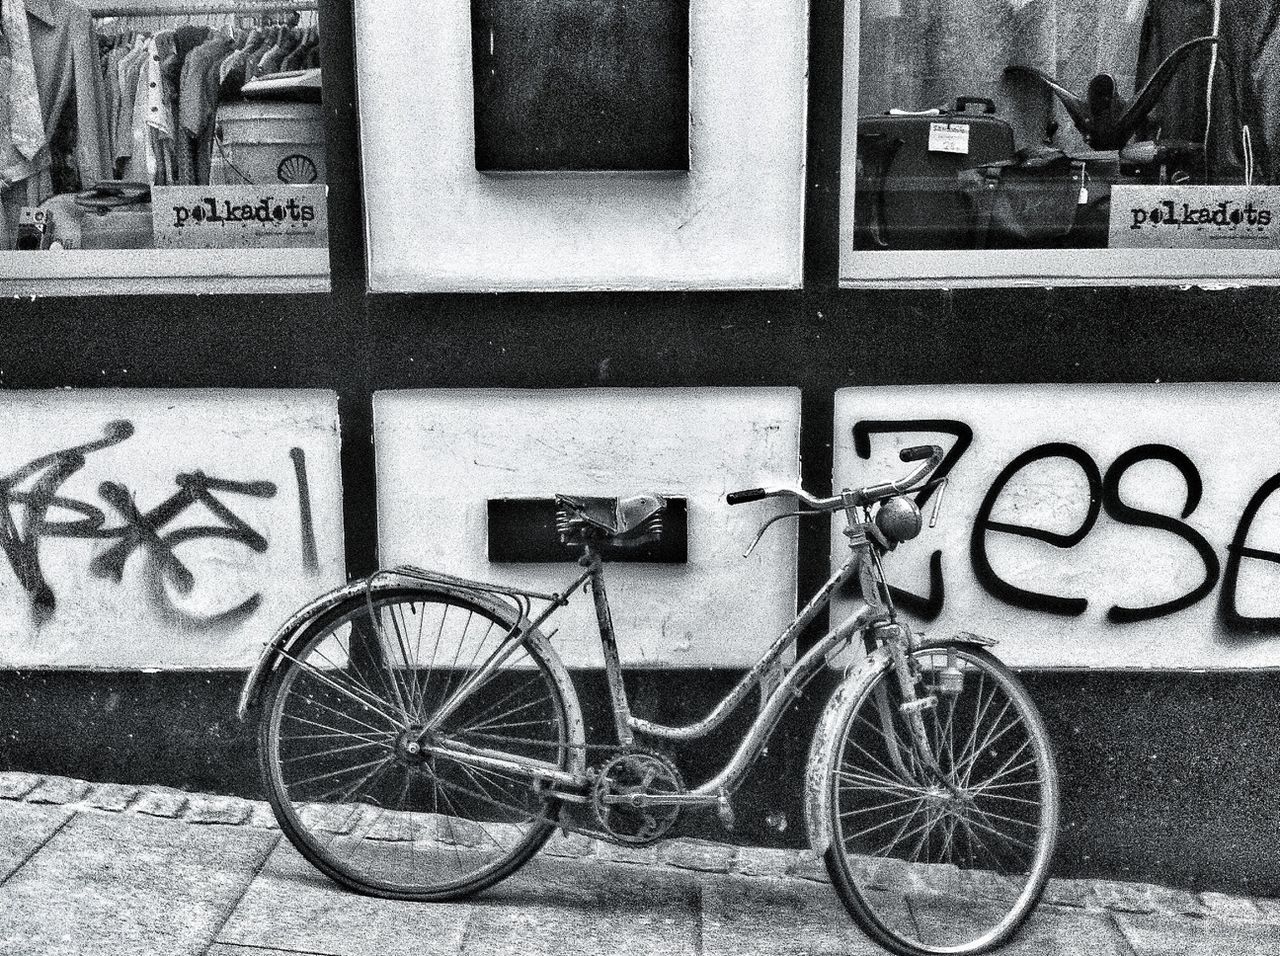 bicycle, transportation, land vehicle, mode of transport, stationary, parked, parking, building exterior, architecture, built structure, wall - building feature, sidewalk, street, graffiti, day, outdoors, no people, wheel, wall, leaning